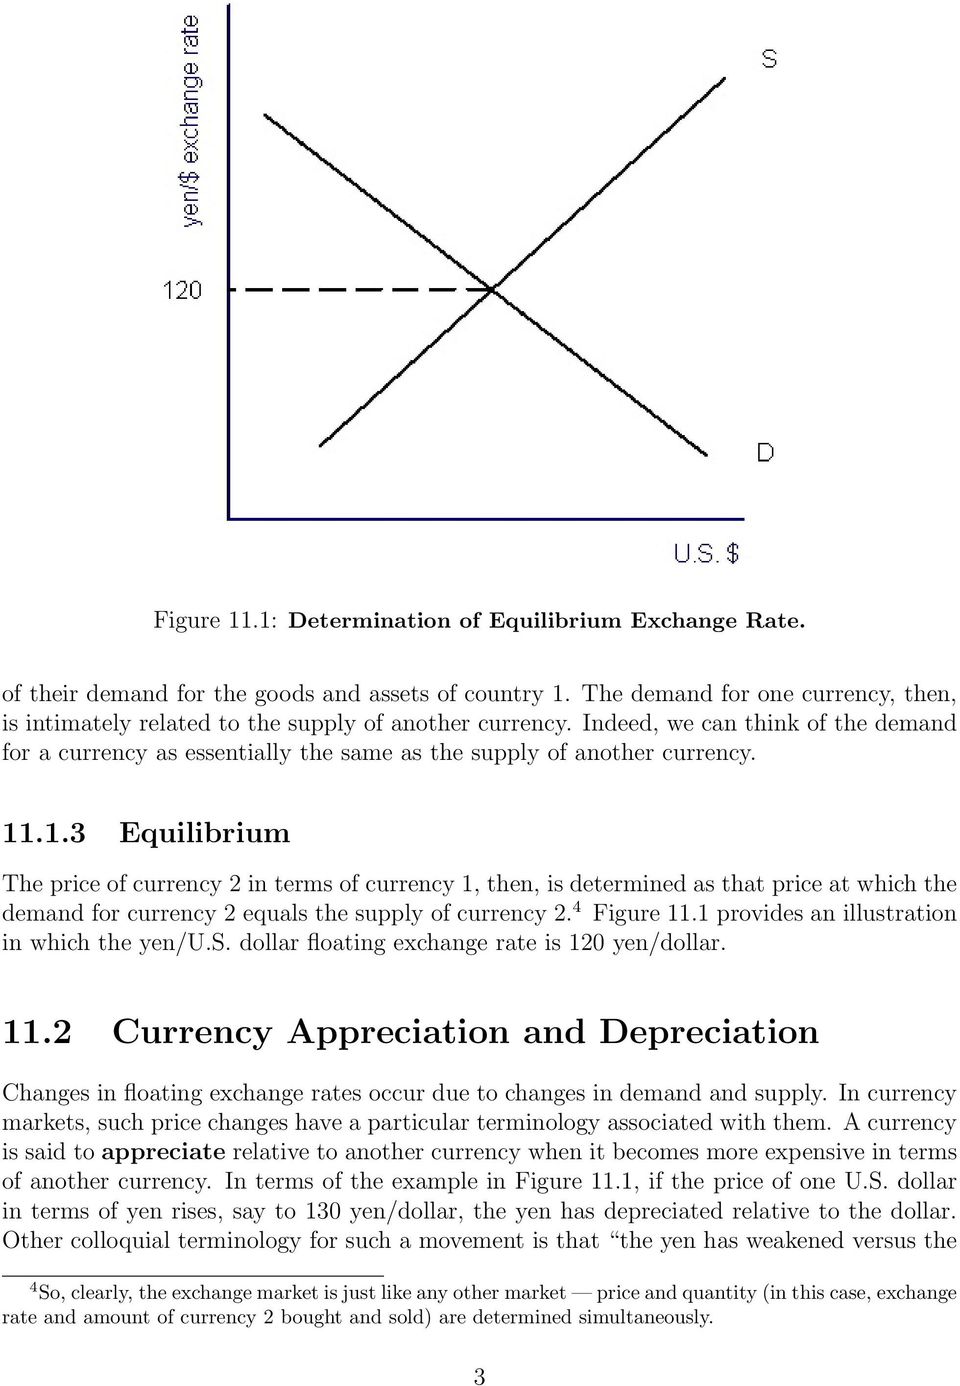 11.1.3 Equilibrium The price of currency 2 in terms of currency 1, then, is determined as that price at which the demand for currency 2 equals the supply of currency 2. 4 Figure 11.